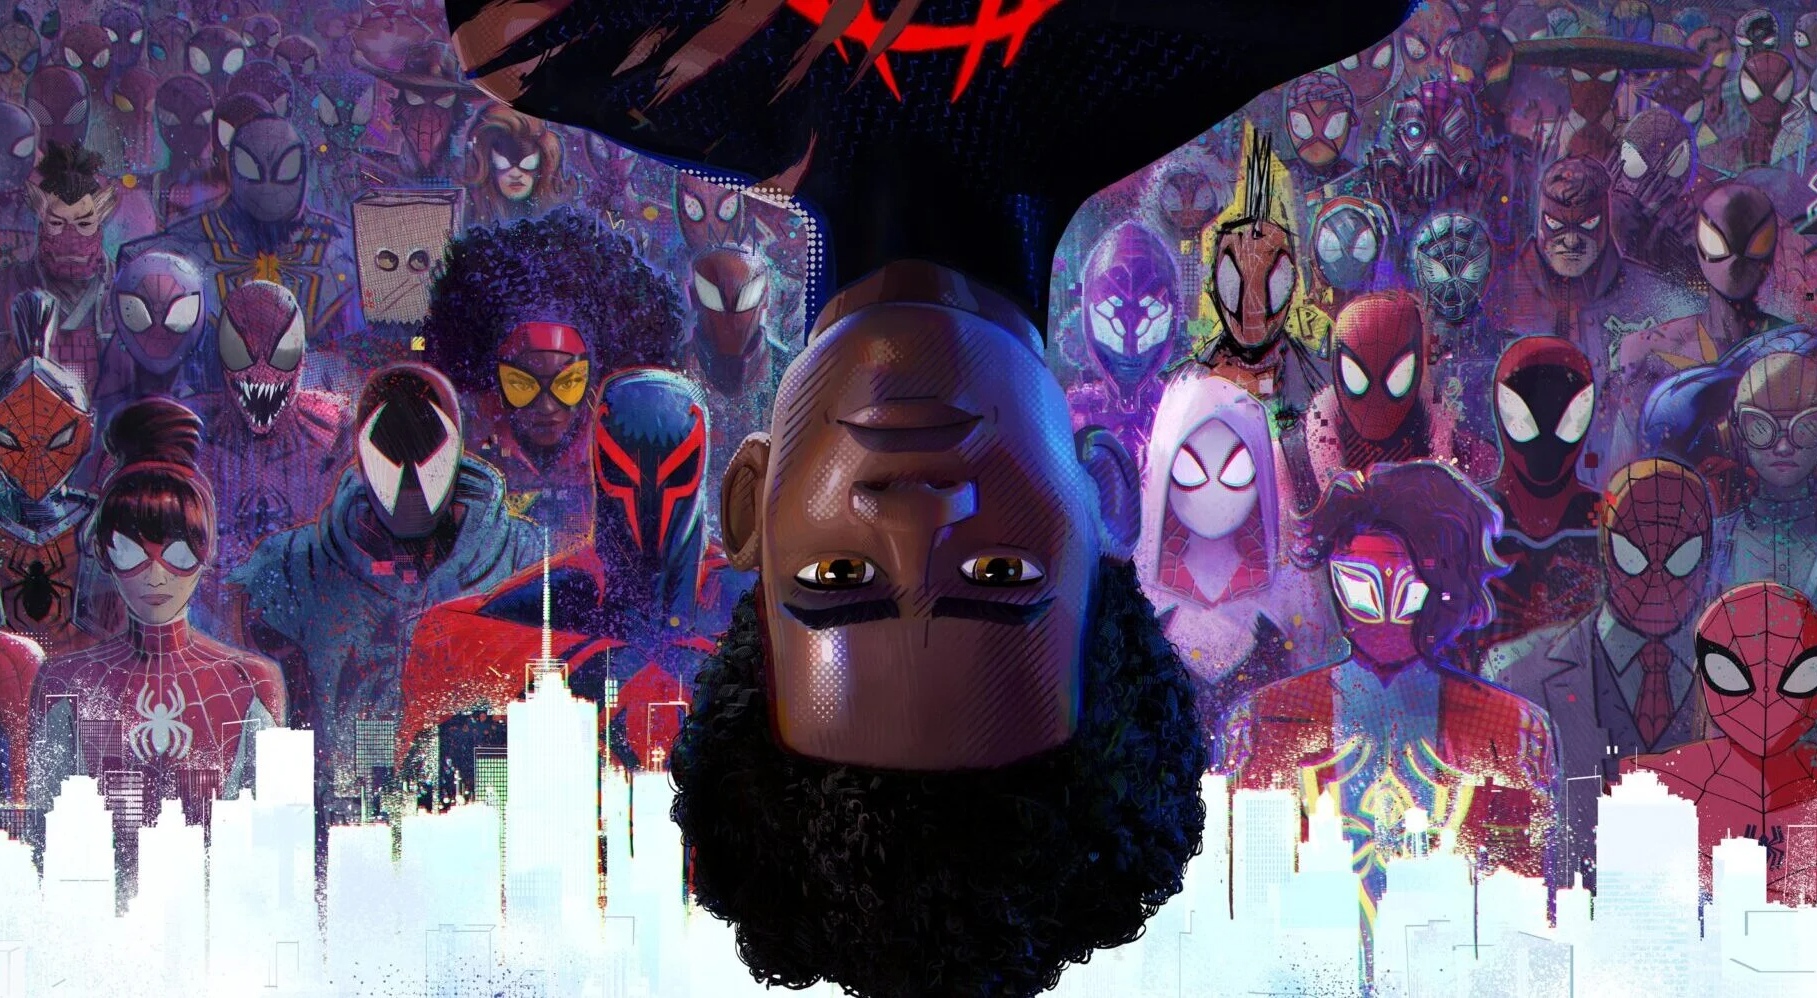 Across the Spider-Verse' posters introduce new human, feline